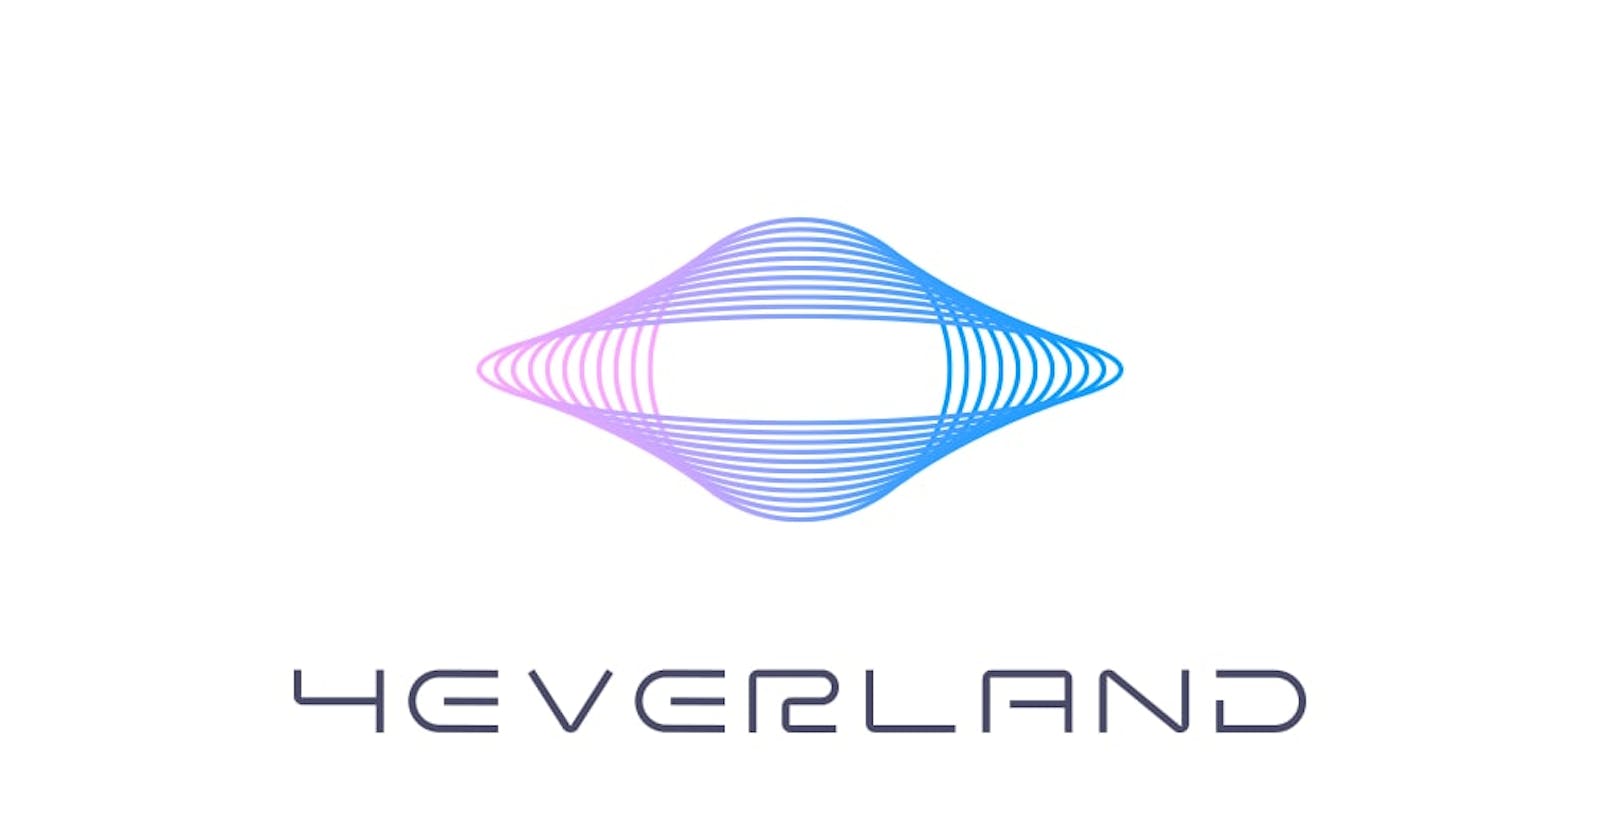 How to deploy your Decentralized Application on 4EVERLAND